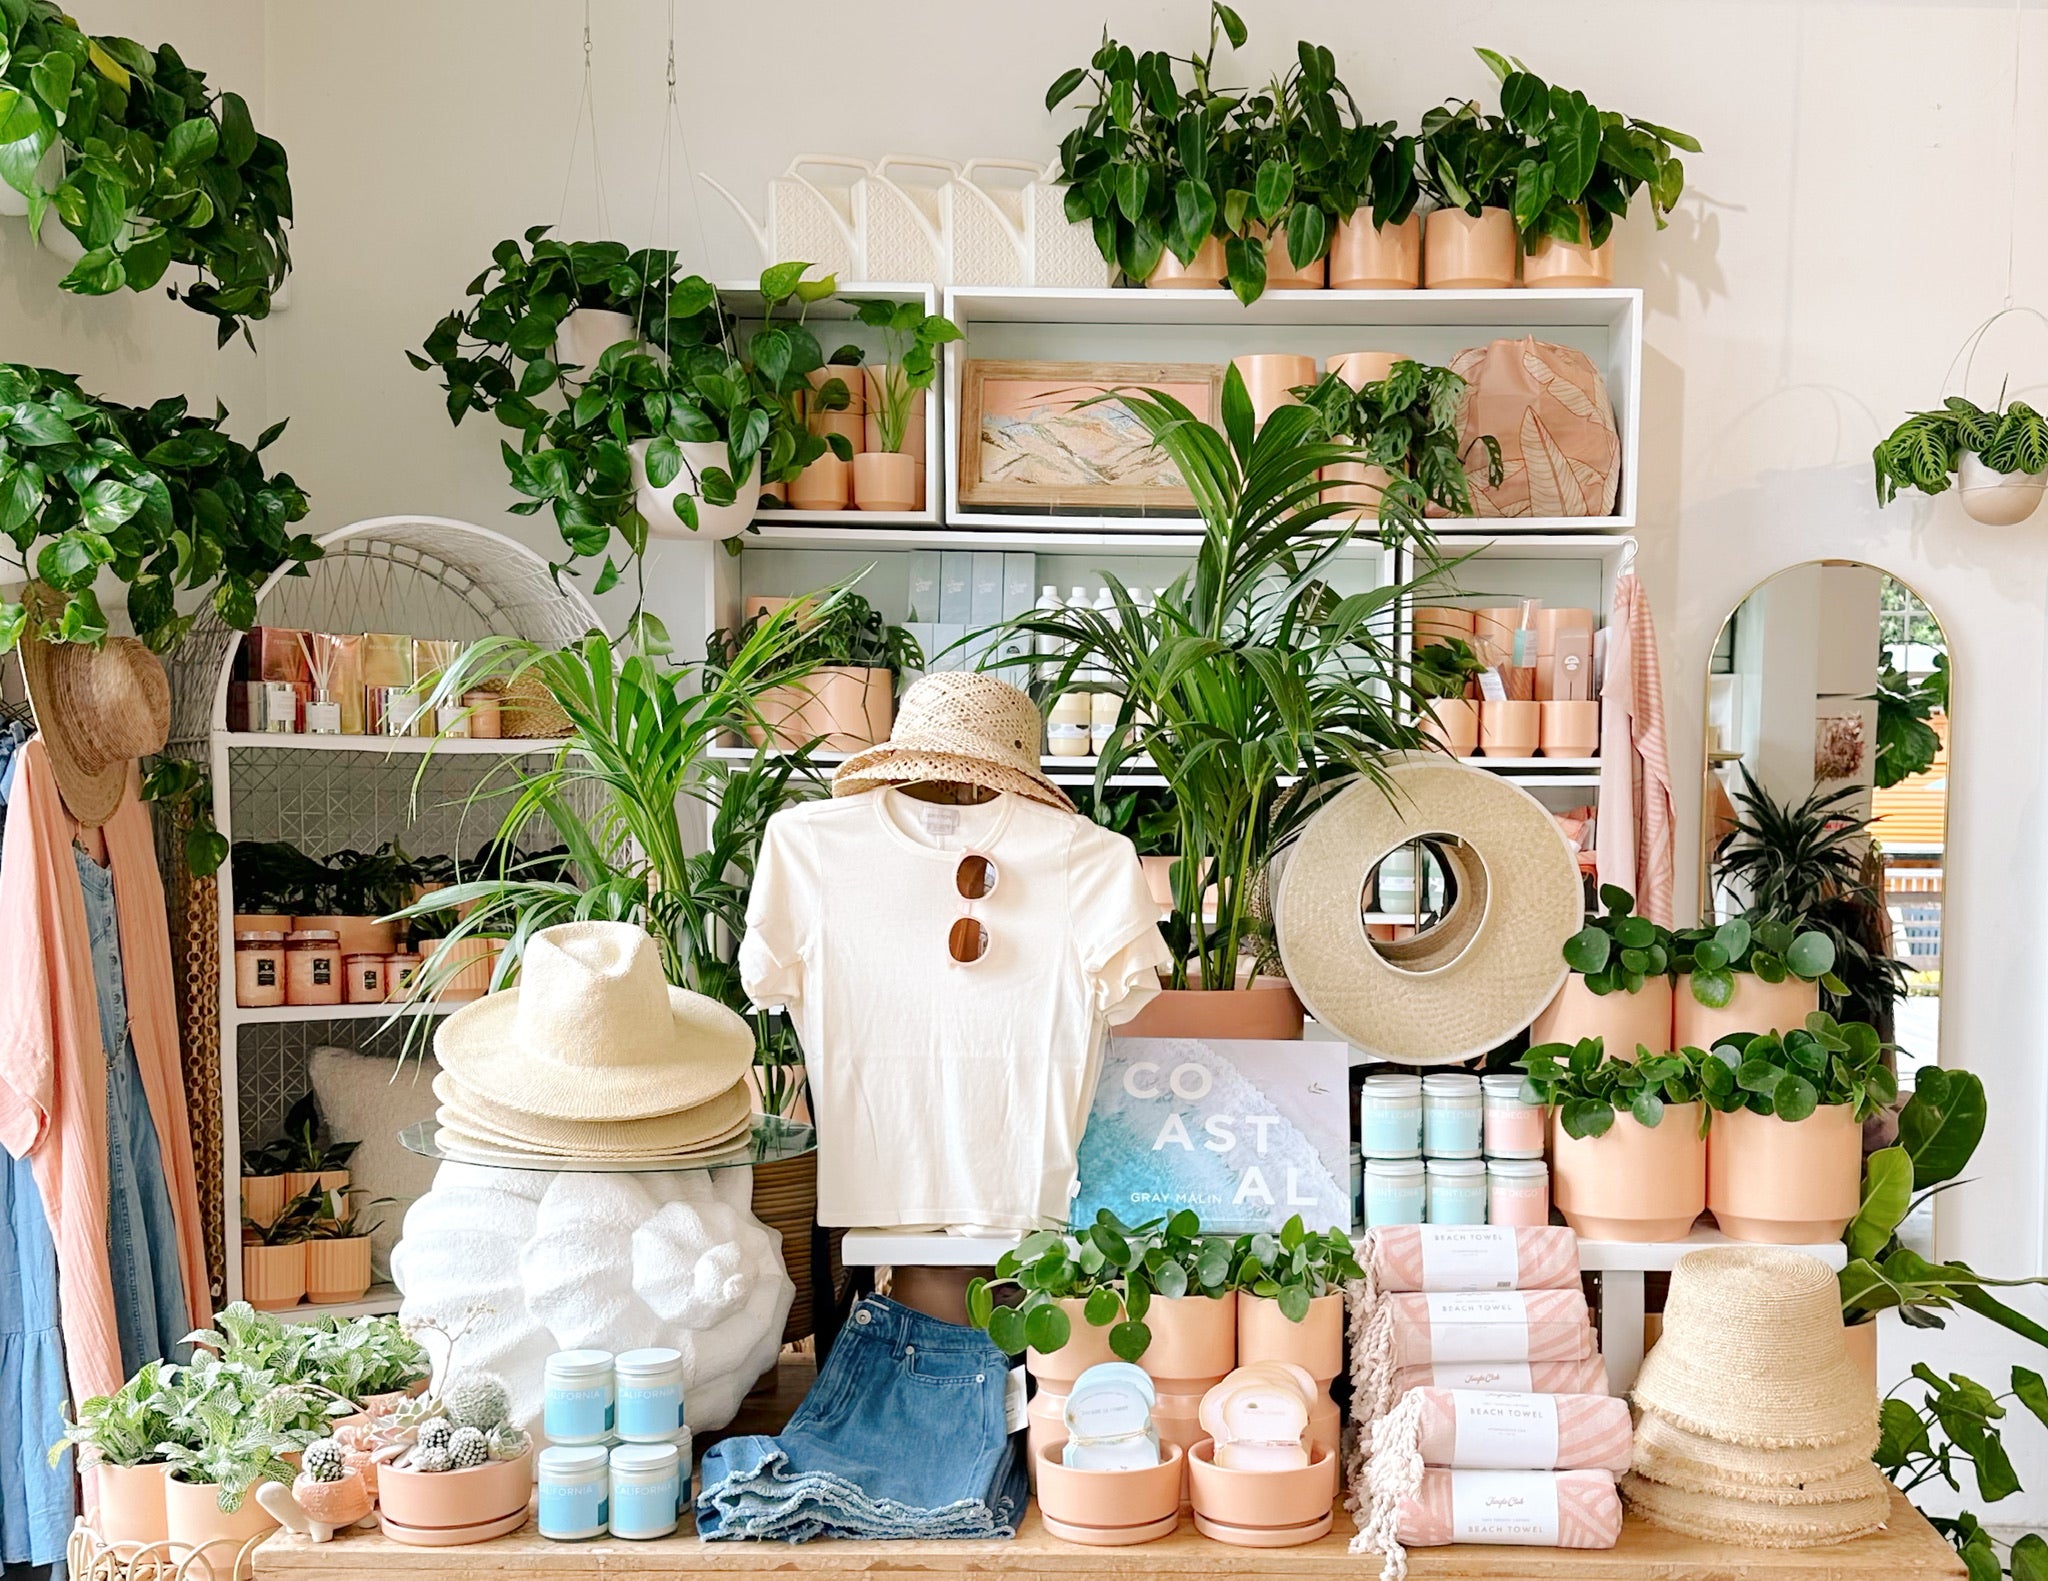 interior store display featuring coastal, beachy products and tropical plants